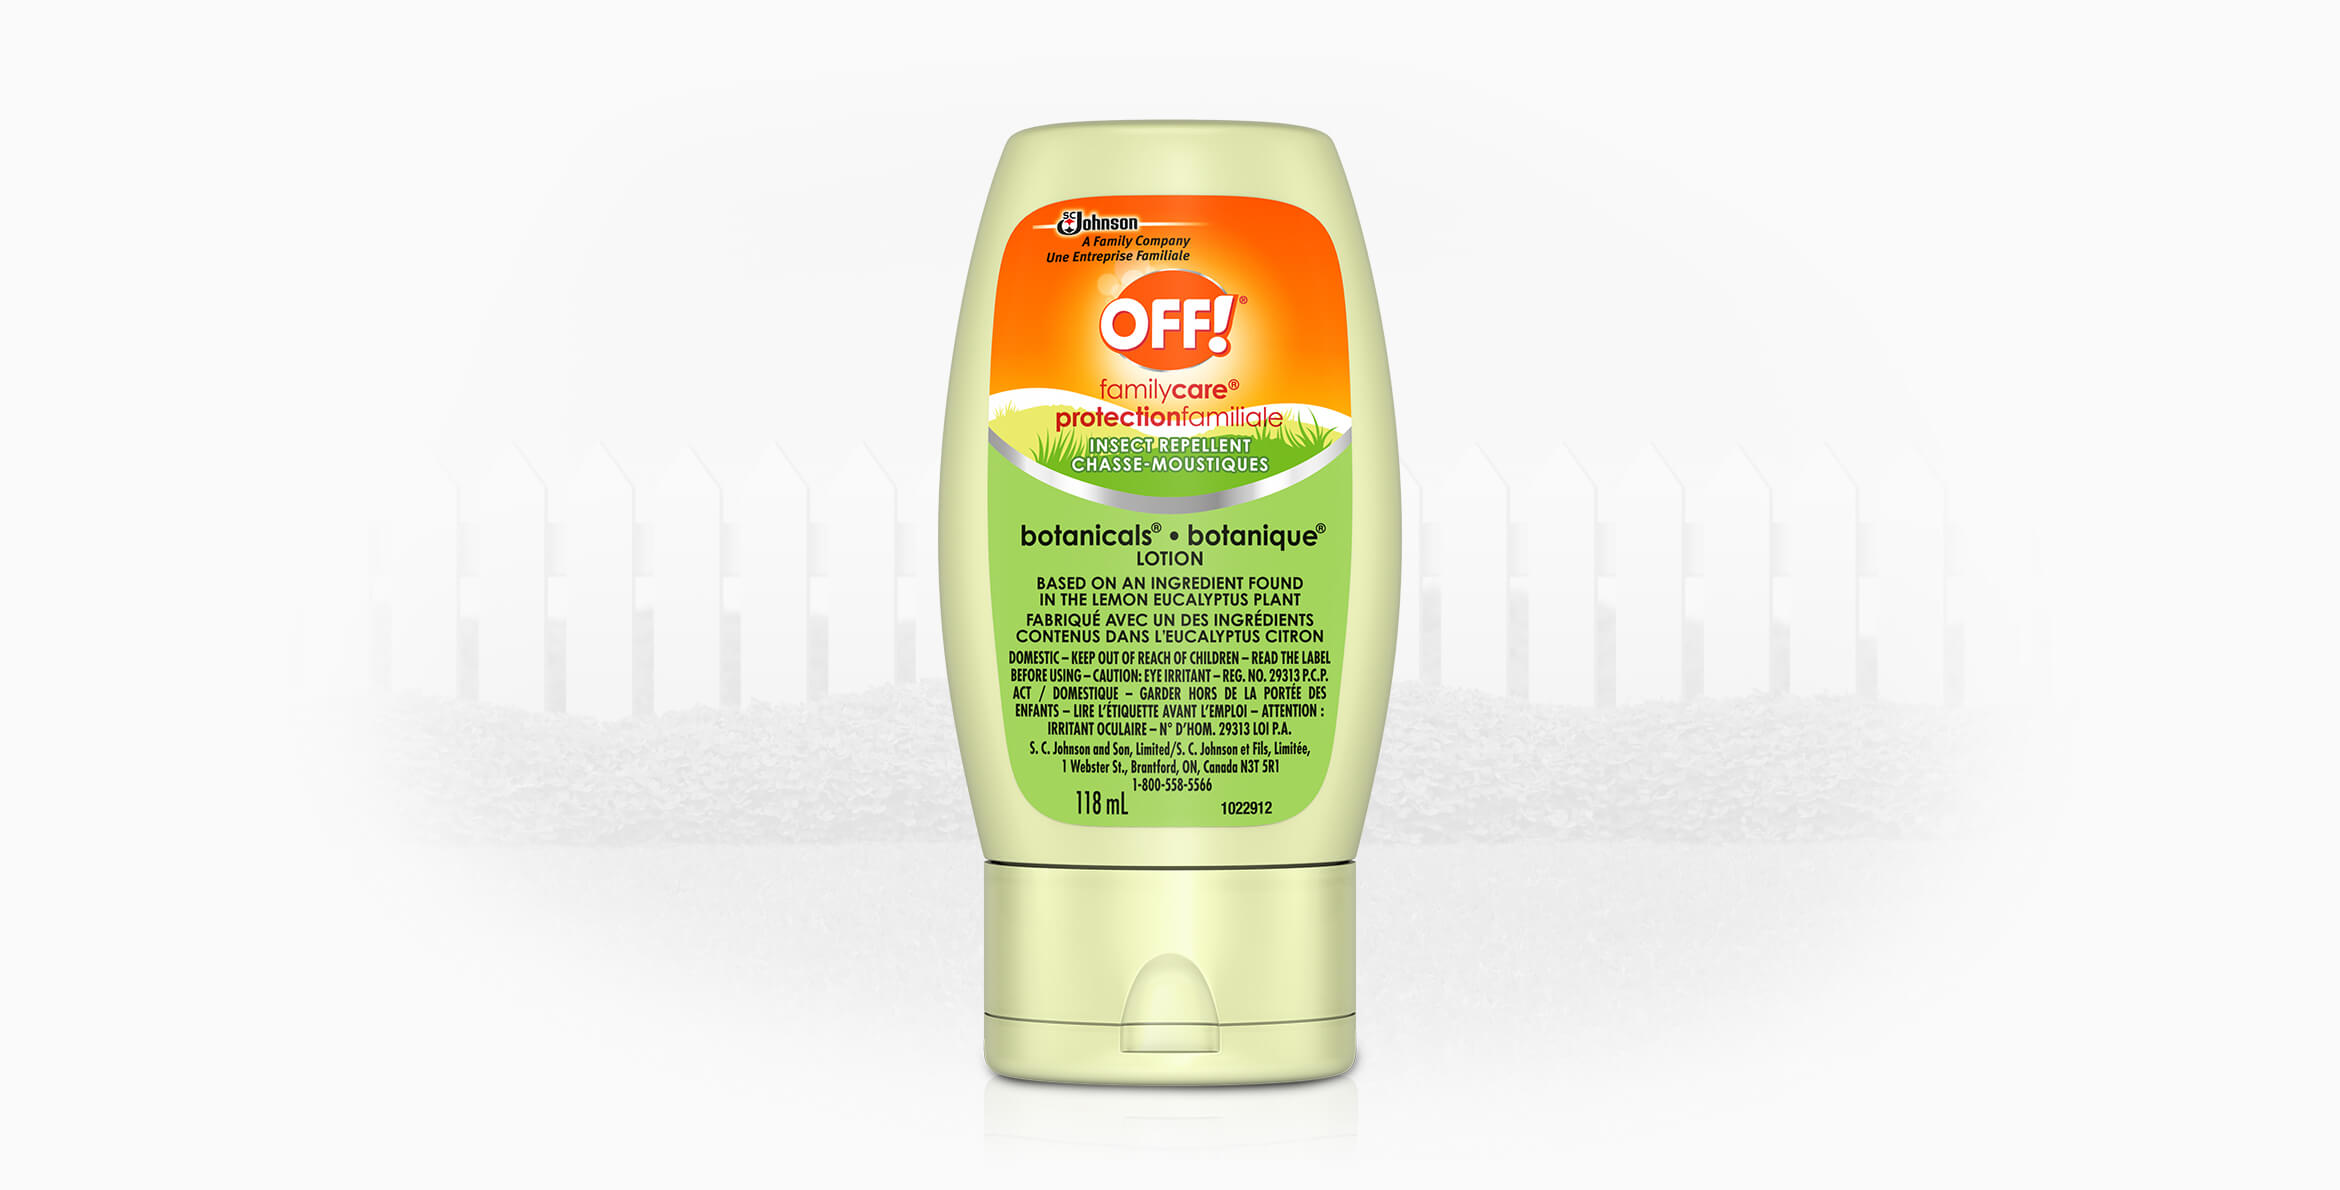 OFF!® FamilyCare® Botanicals Insect Repellent Lotion